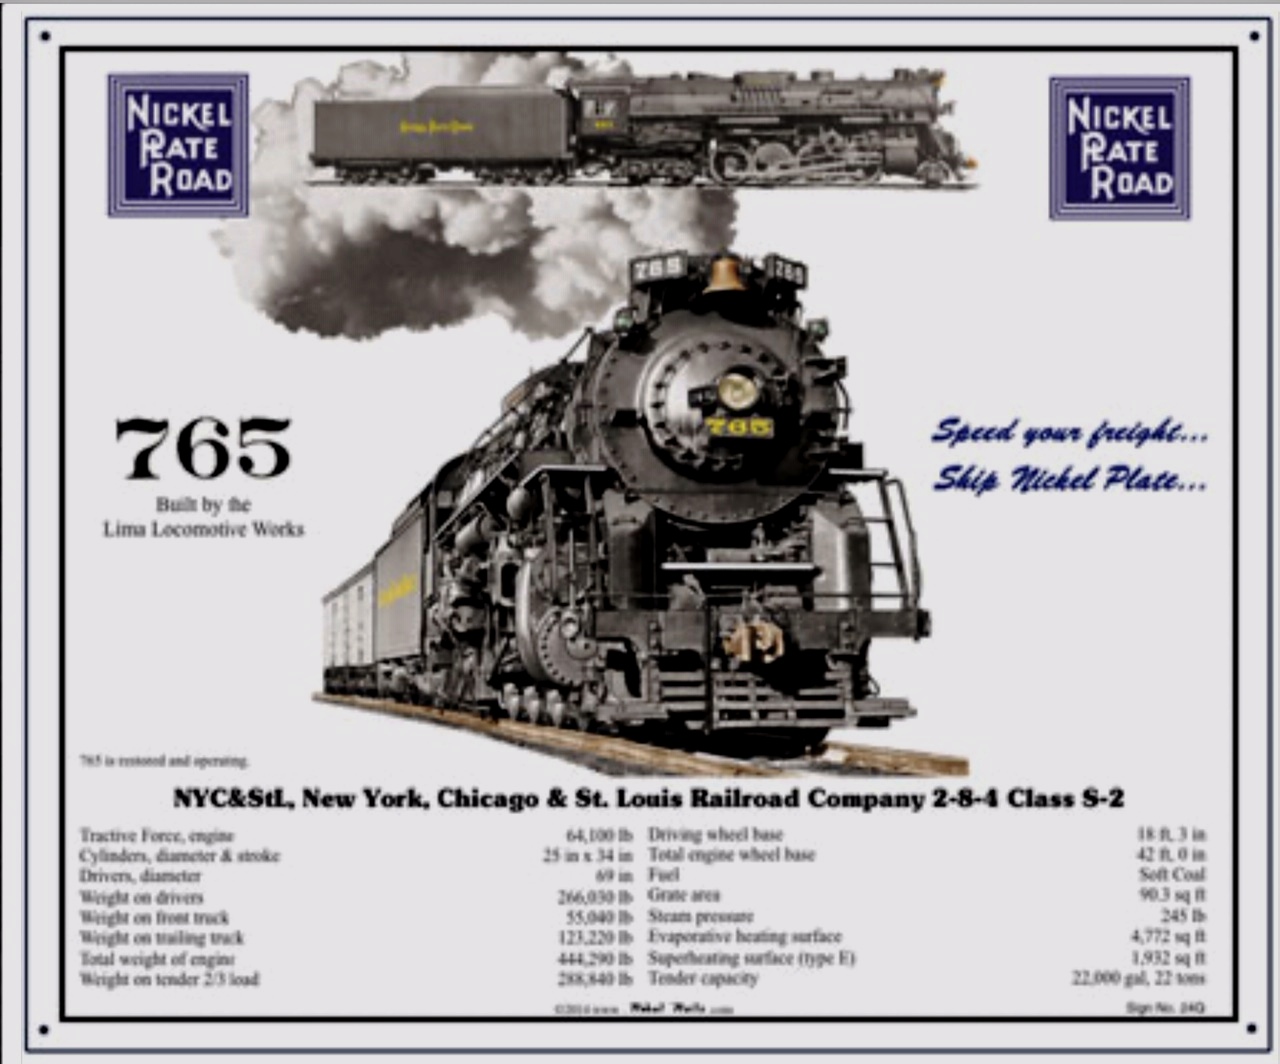 The New York Chicago and St. Louis Railroad Company nickel 